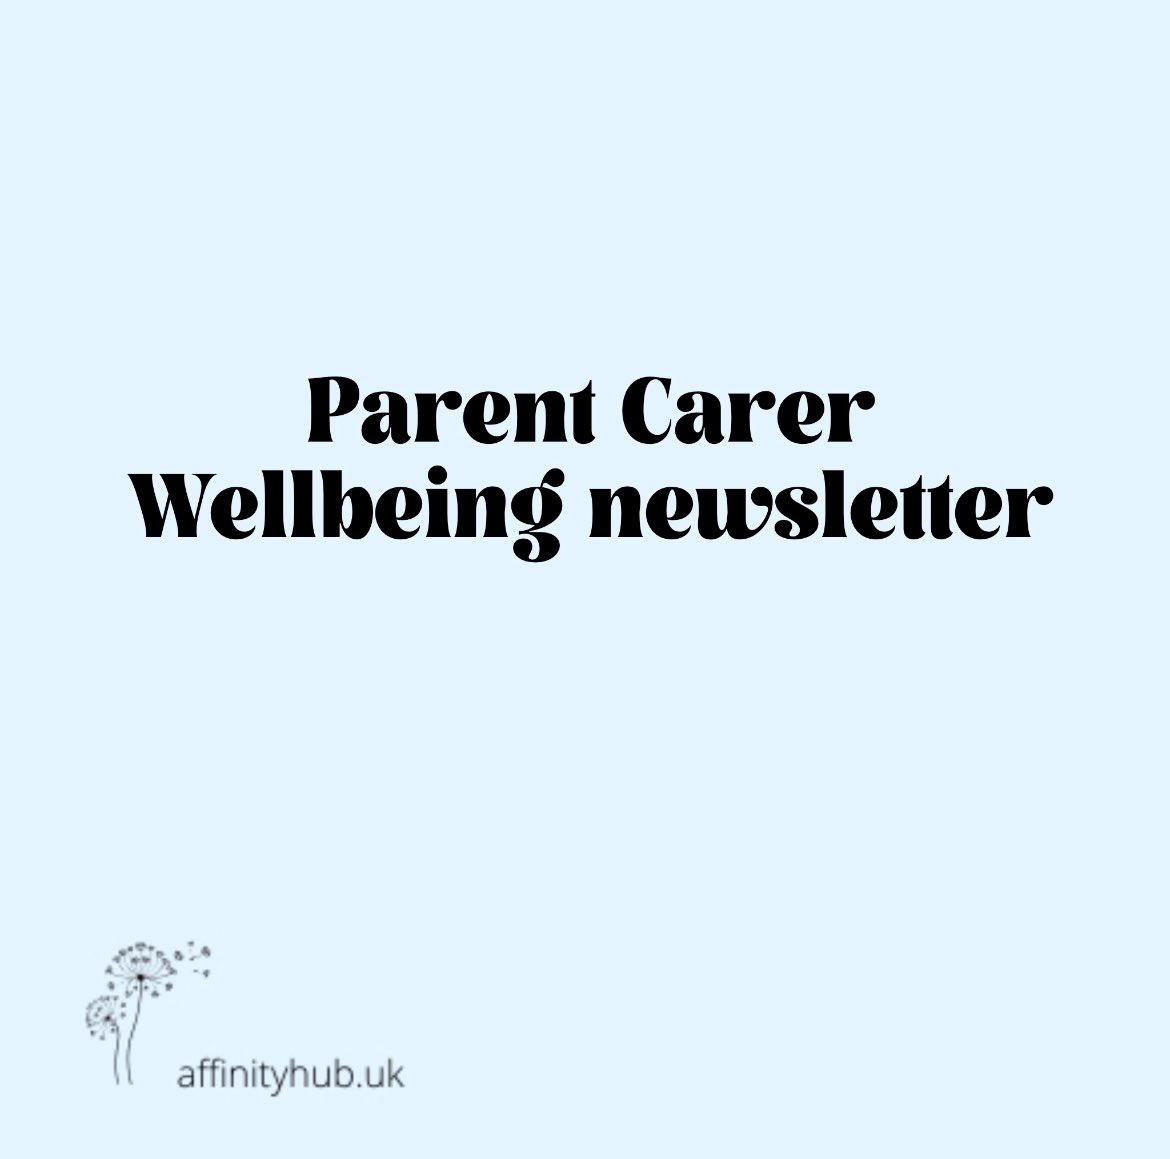 Professionals with an interest in the psychological wellbeing of parents of disabled children - sign up to info & research quarterly newsletter here: bitly.ws/Q2wR #parentcarers and #specialneedsparents can sign up too #parentcarerwellbeing Affinityhub.uk